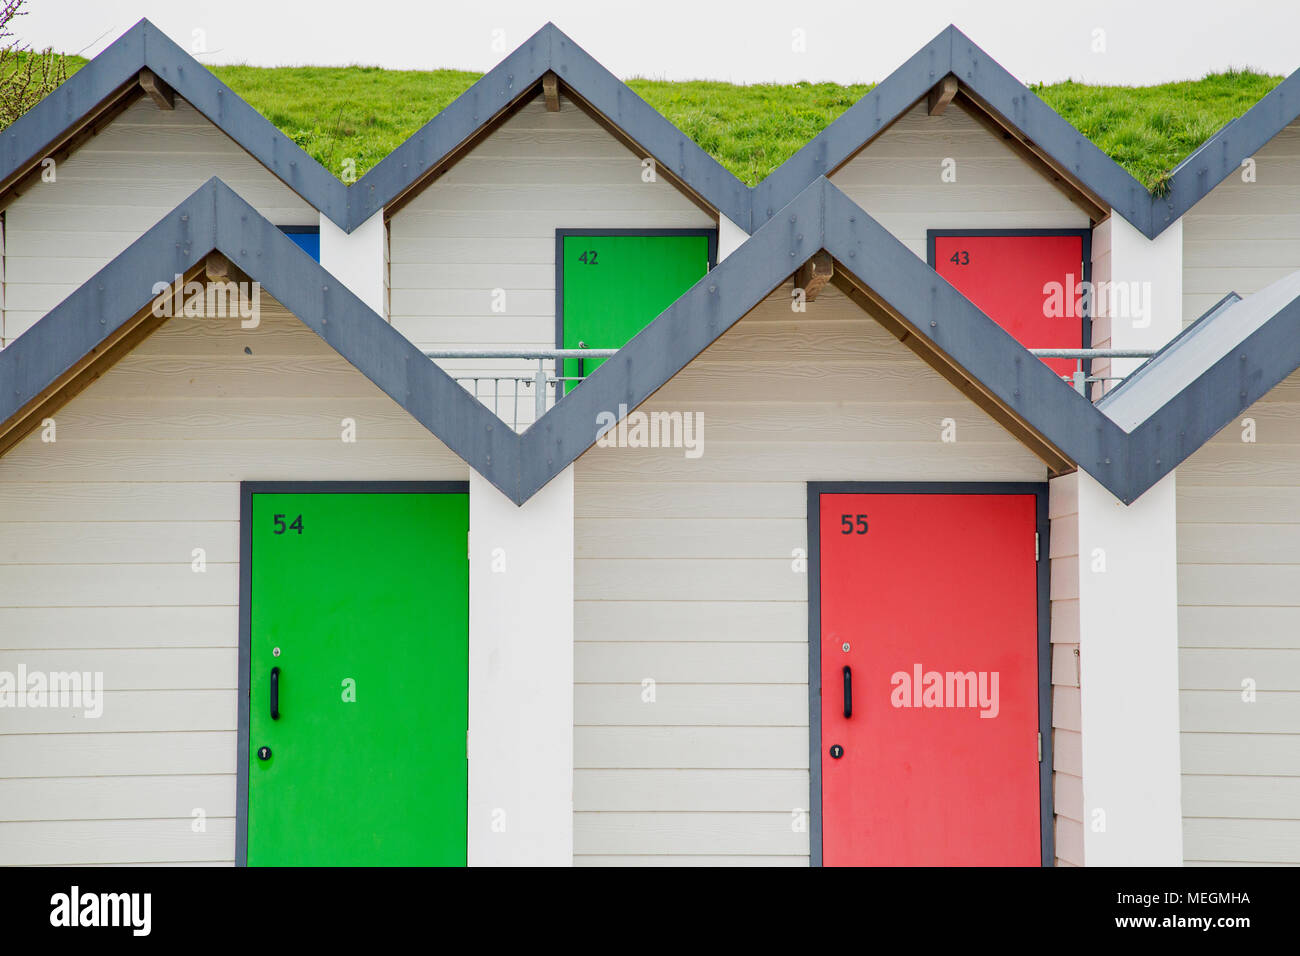 Swanage, Dorset, England, April 2018, a view of colorful beach huts Stock Photo